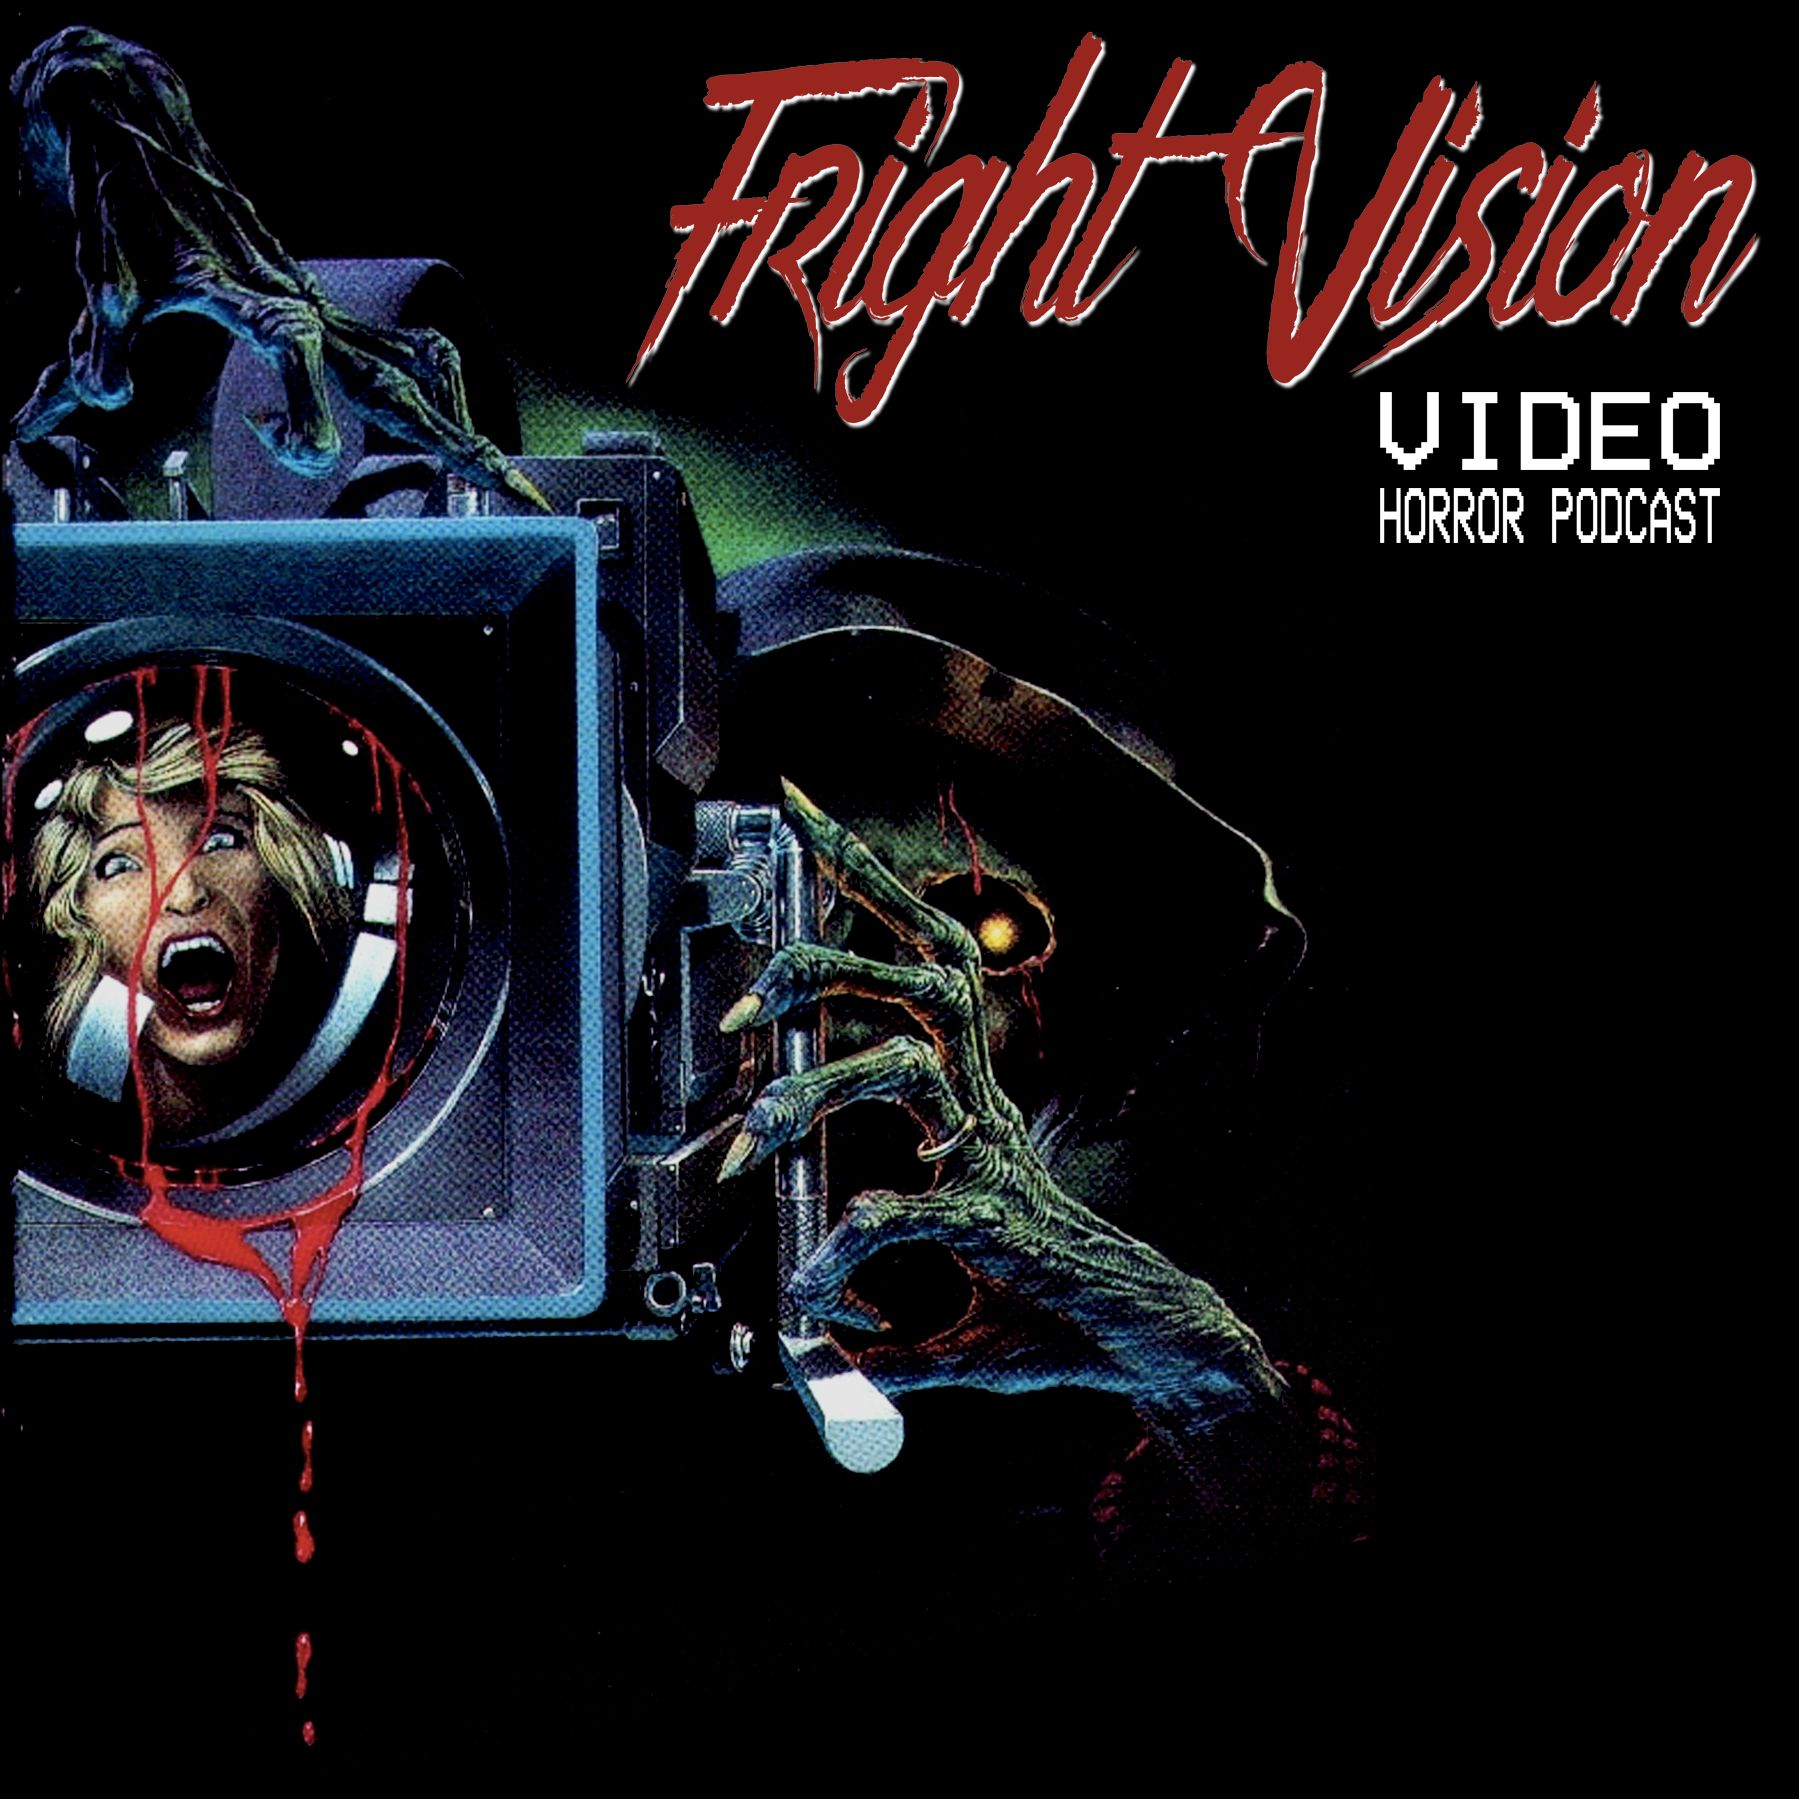 Fright Vision Video Horror Podcast